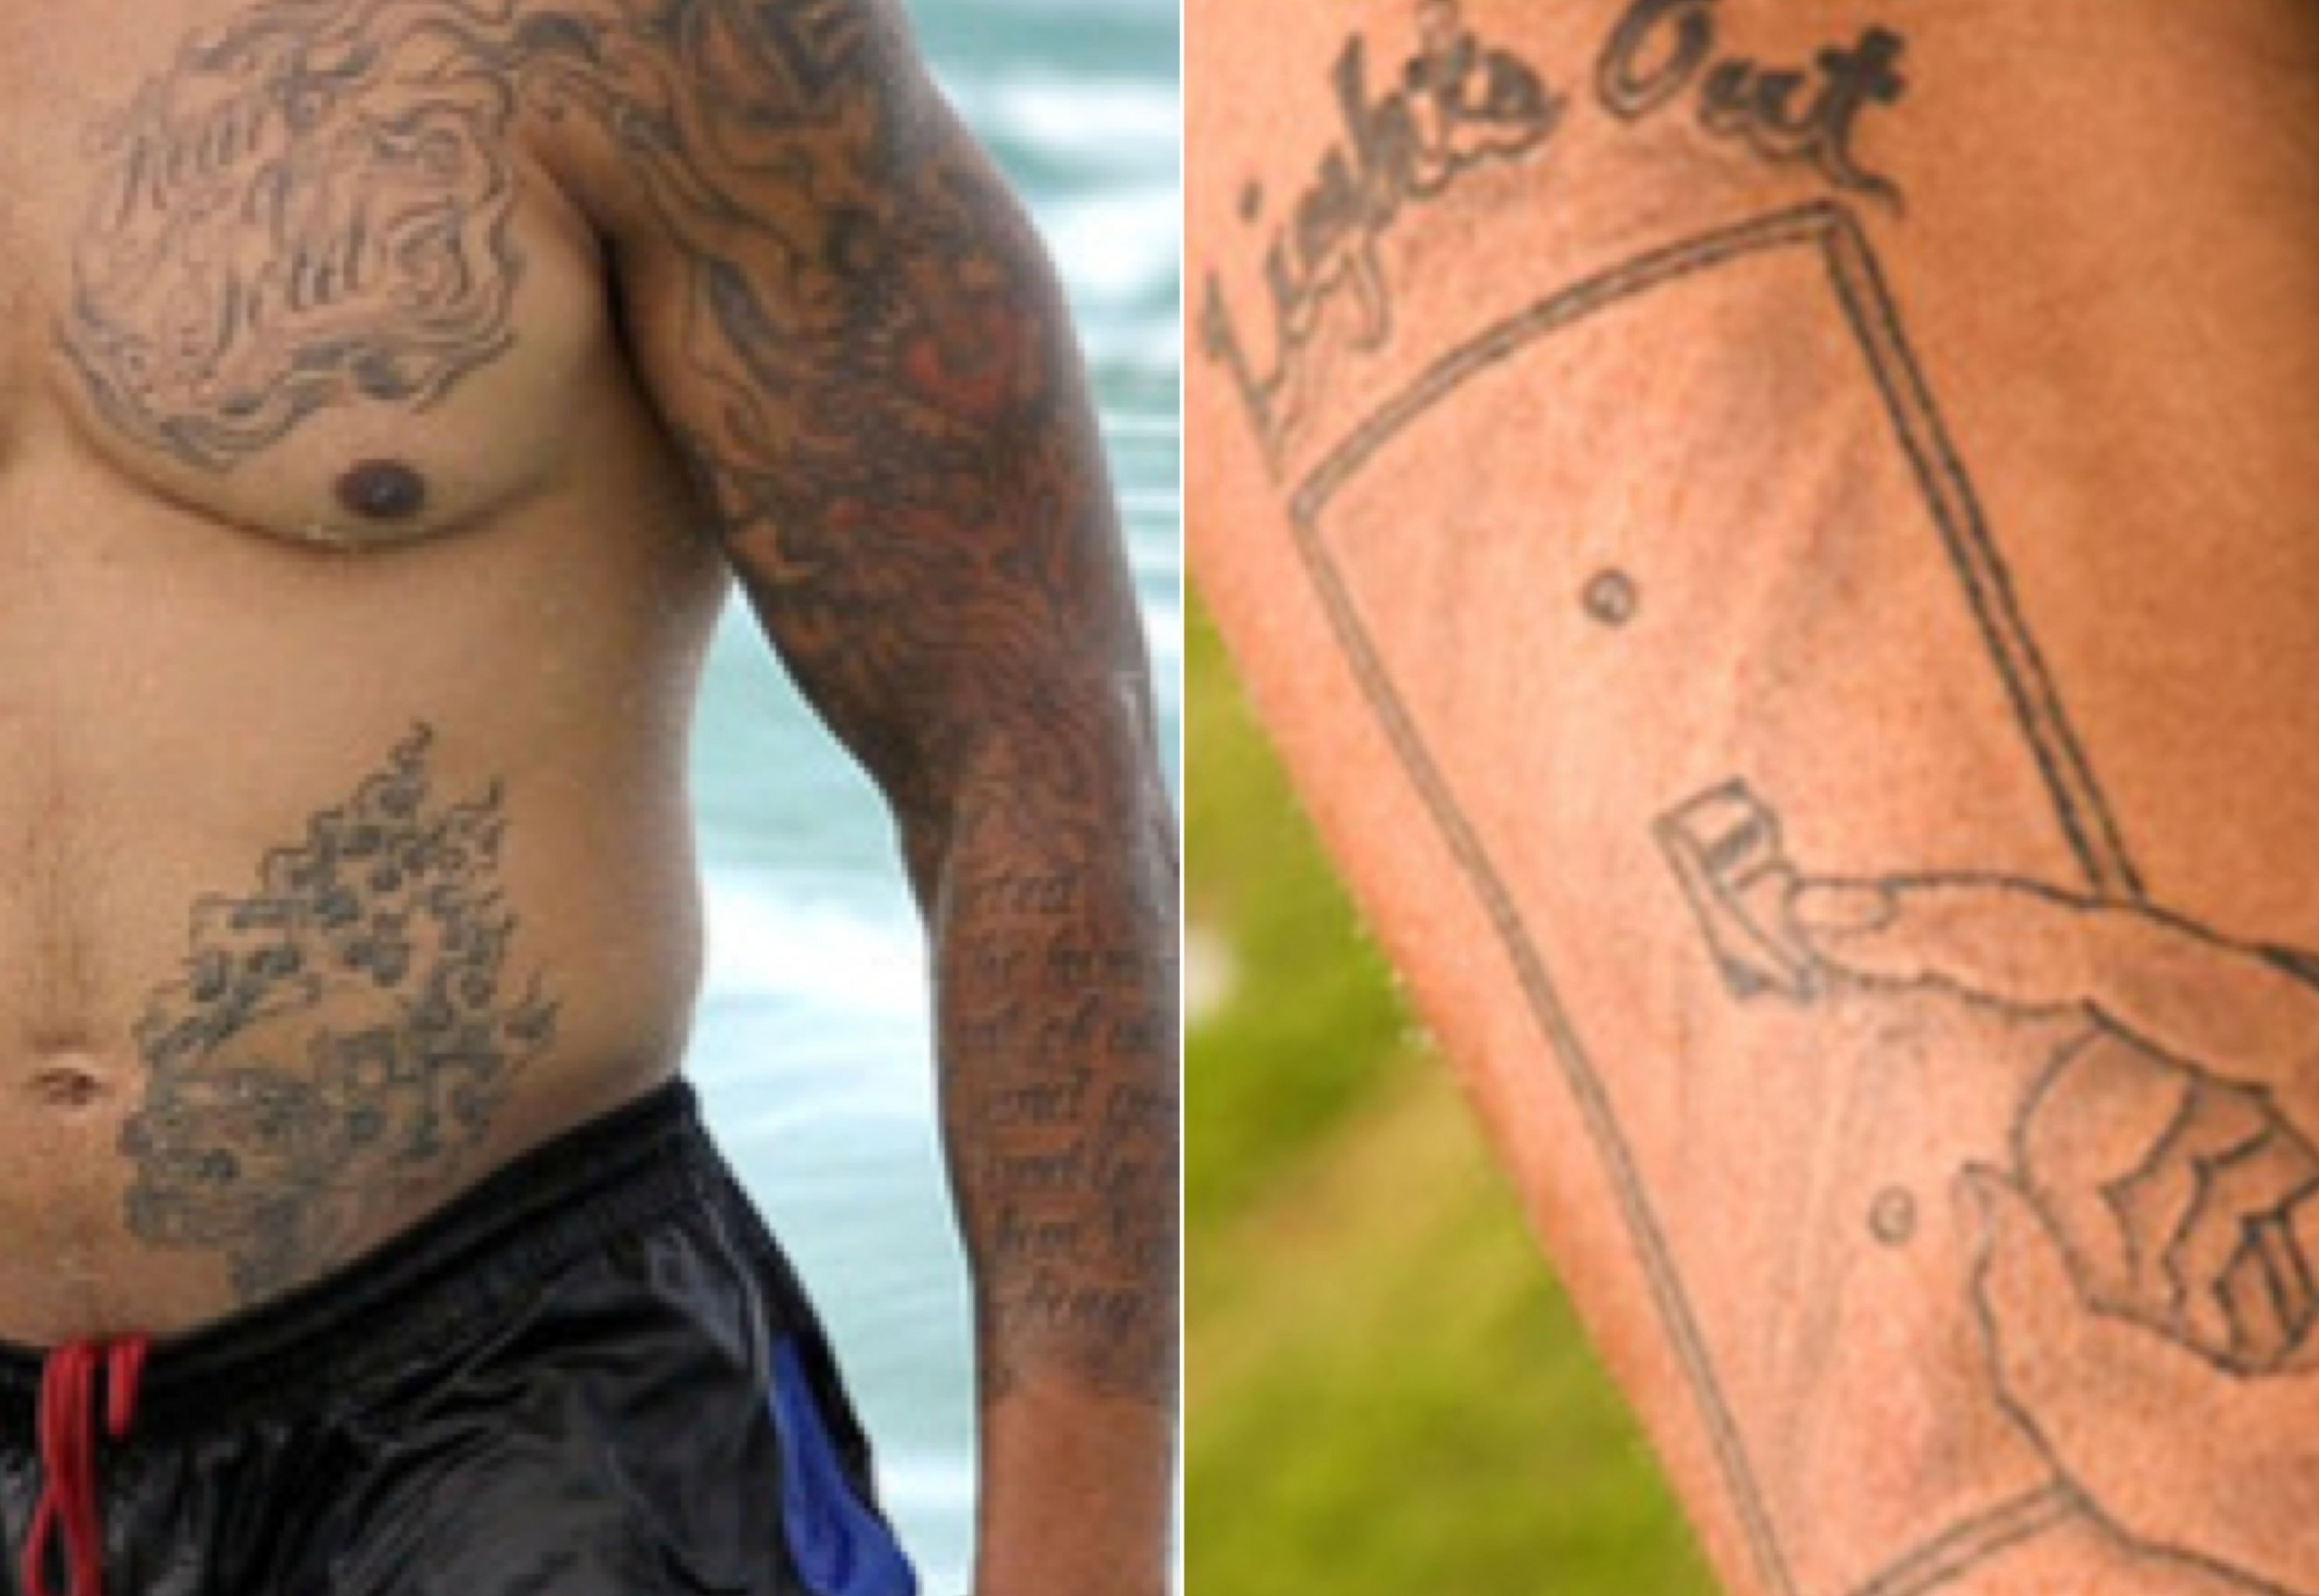 Robert Sacre has a huge tattoo of Snoop Dogg and DMX on his torso (Picture)